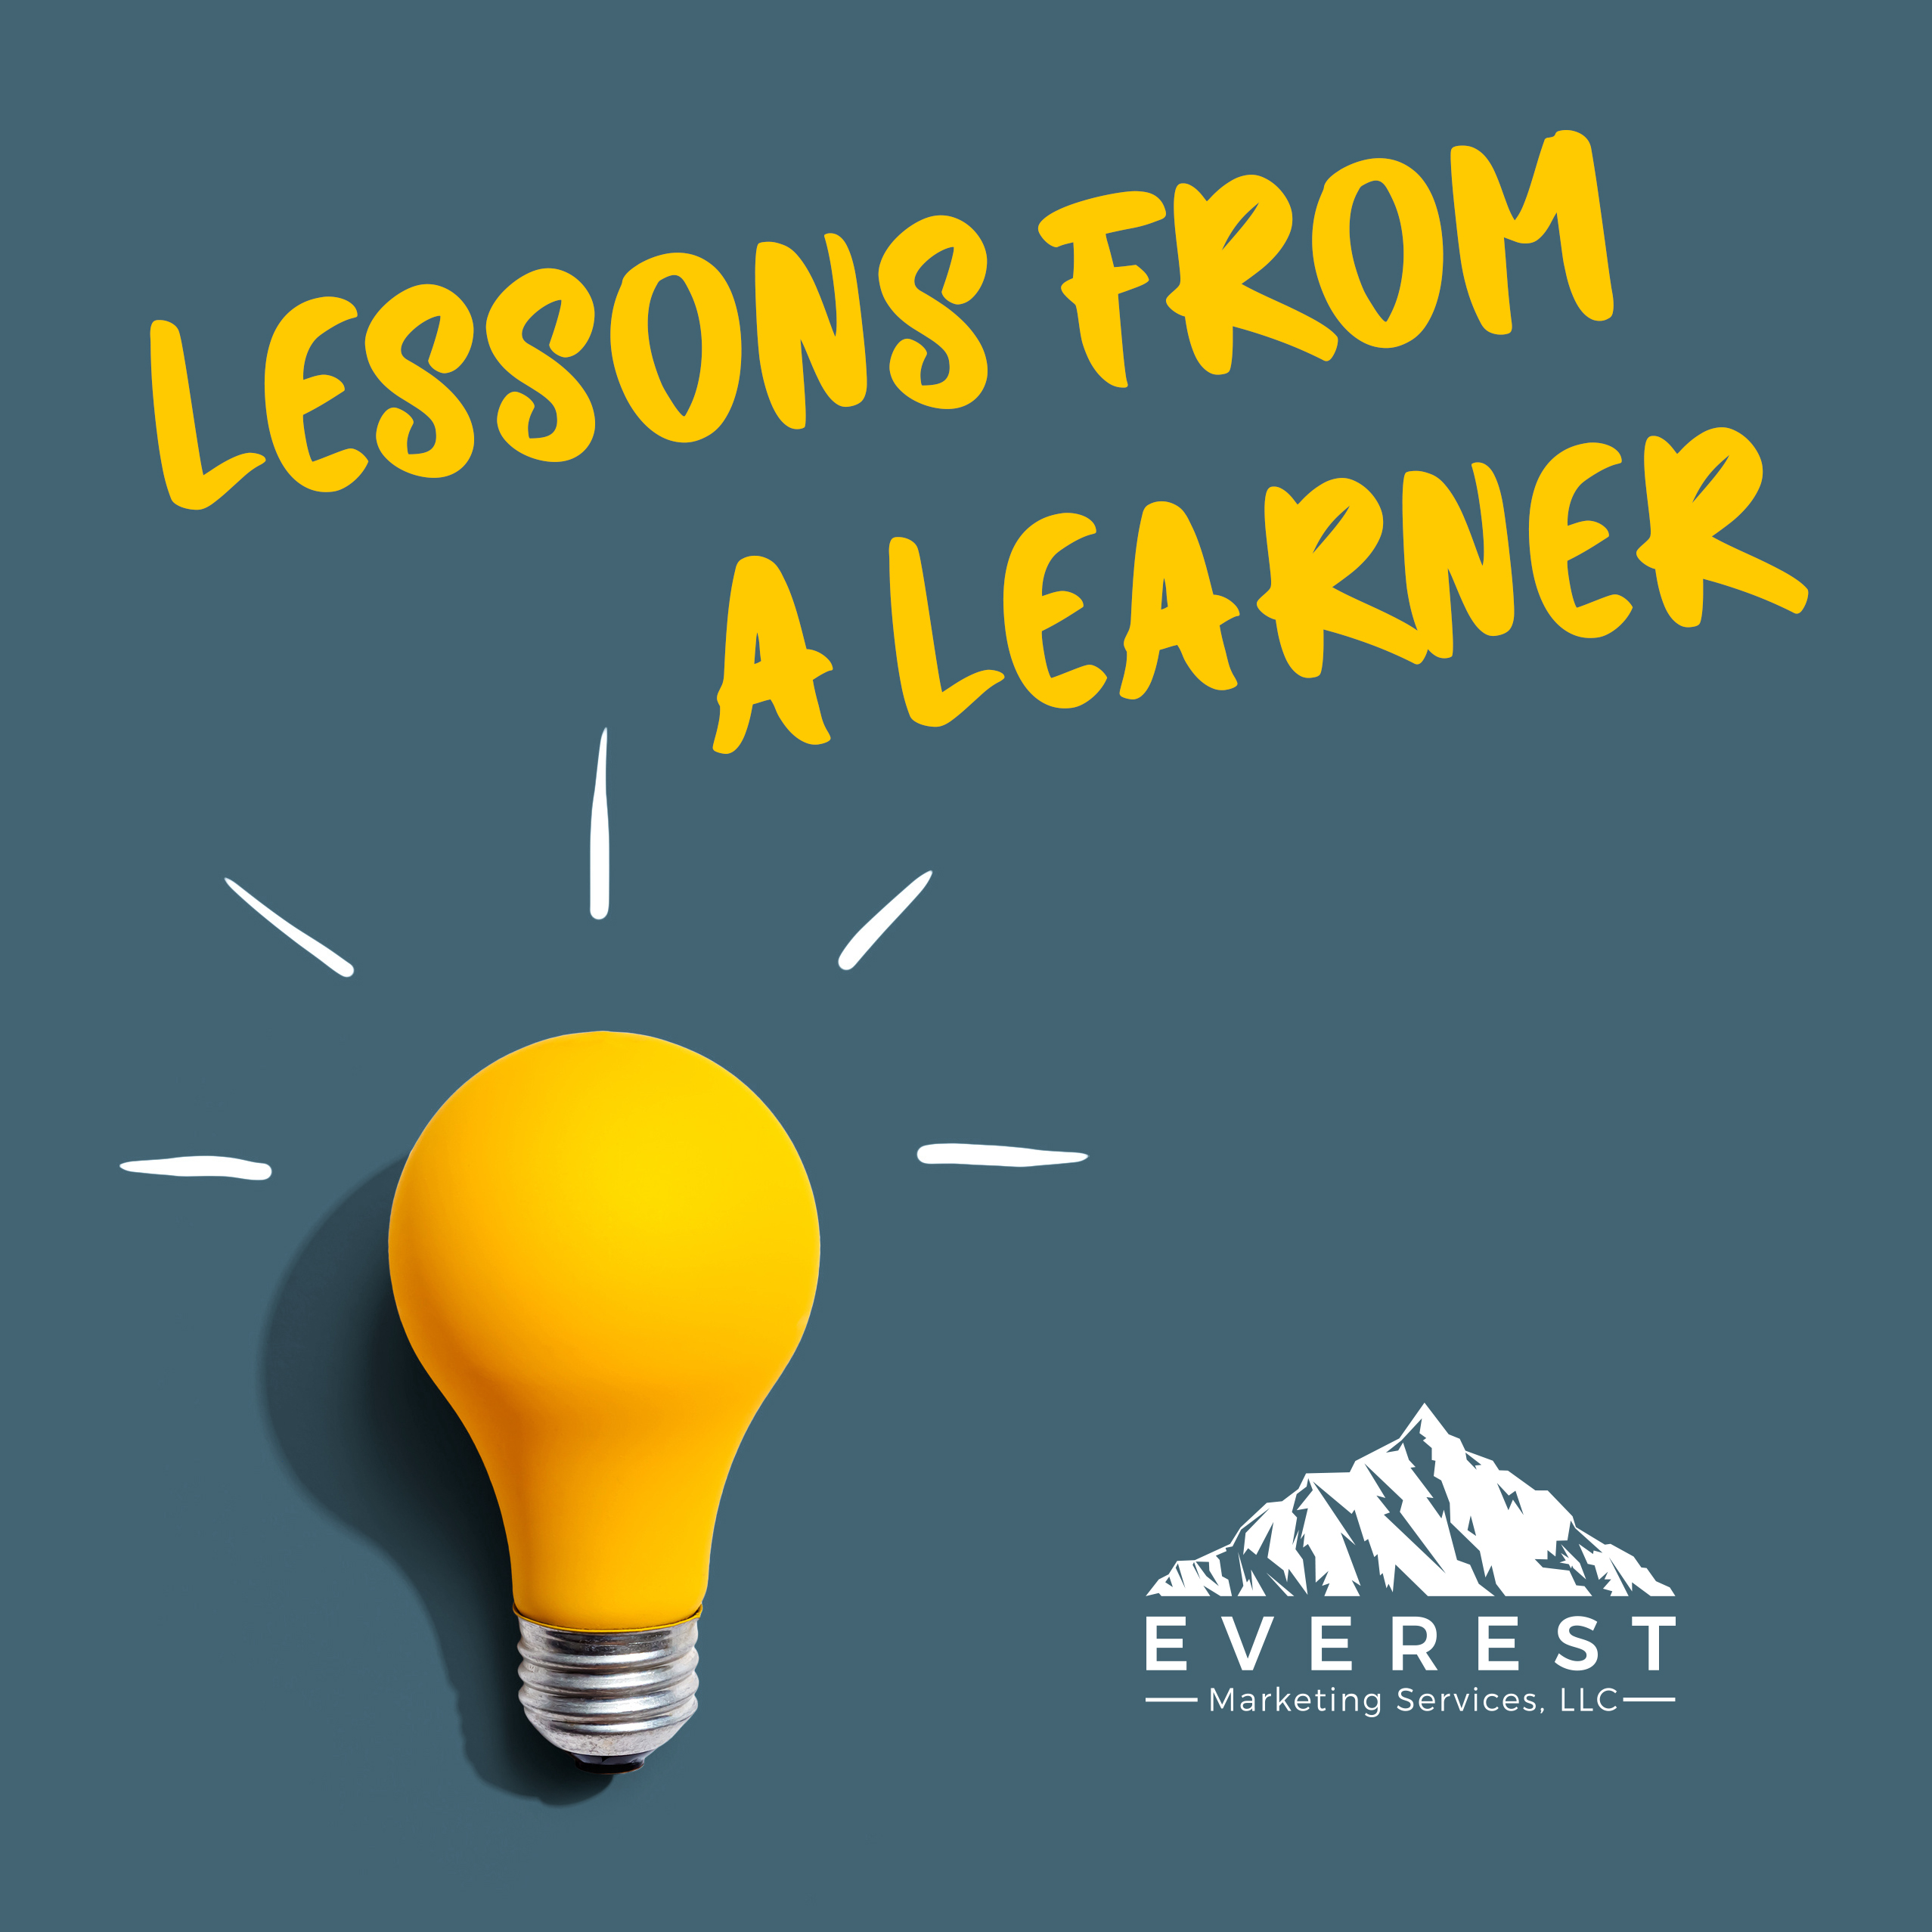 You are currently viewing Lessons from a Learner